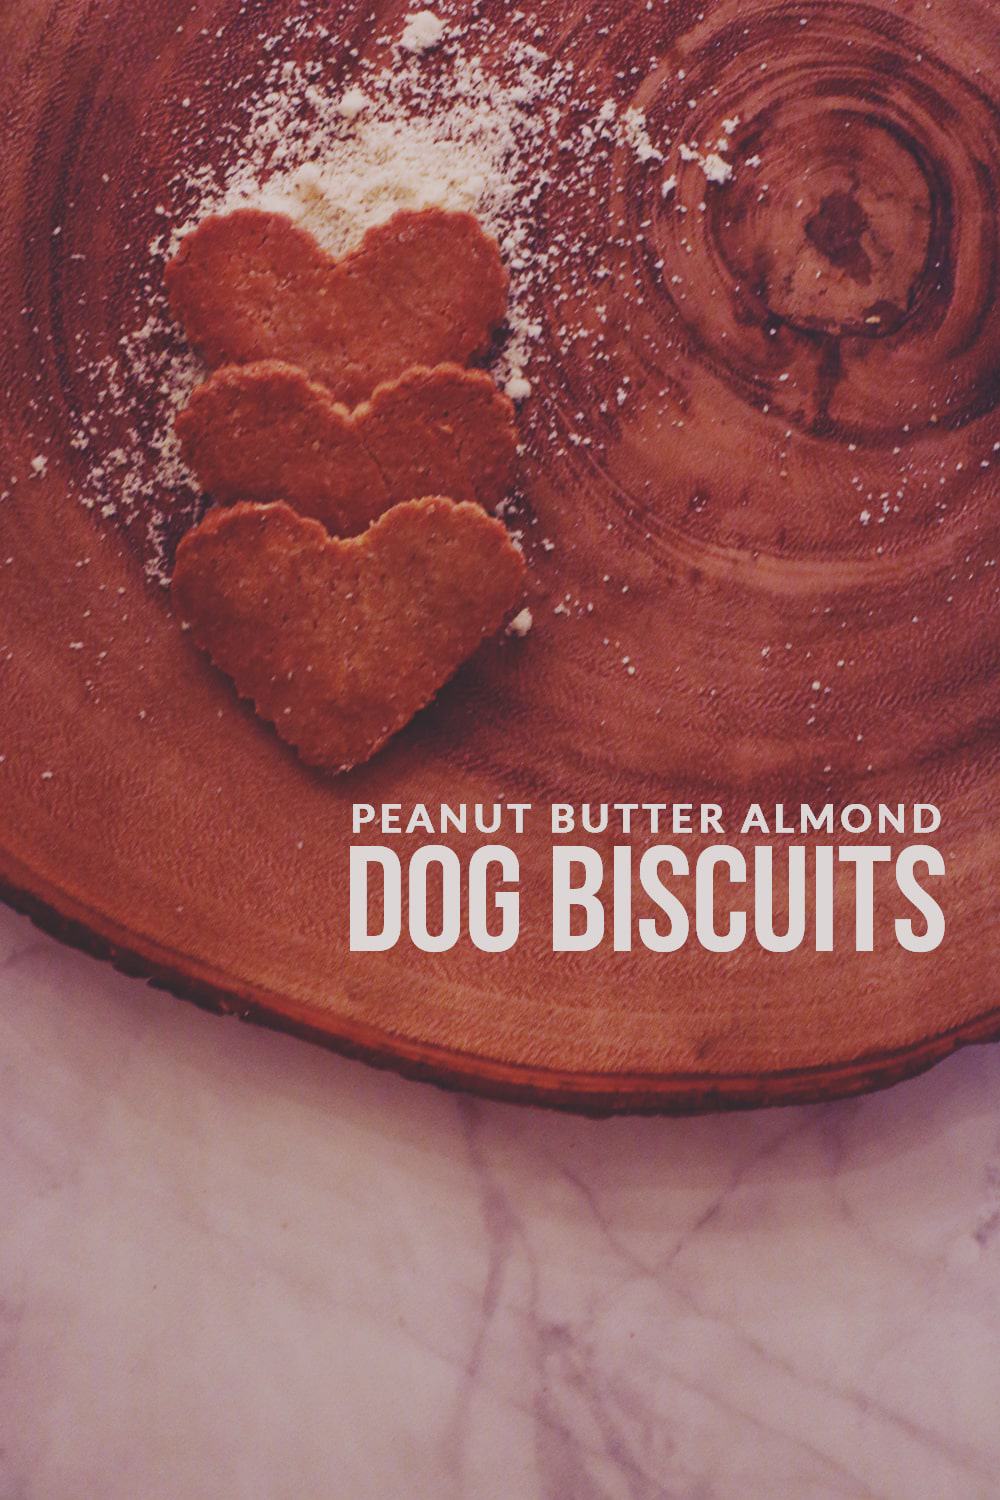 Need a gift for your furry friend? Make these deliciously easy Peanut Butter Almond Dog Biscuits! You'll never need store bought treats again!